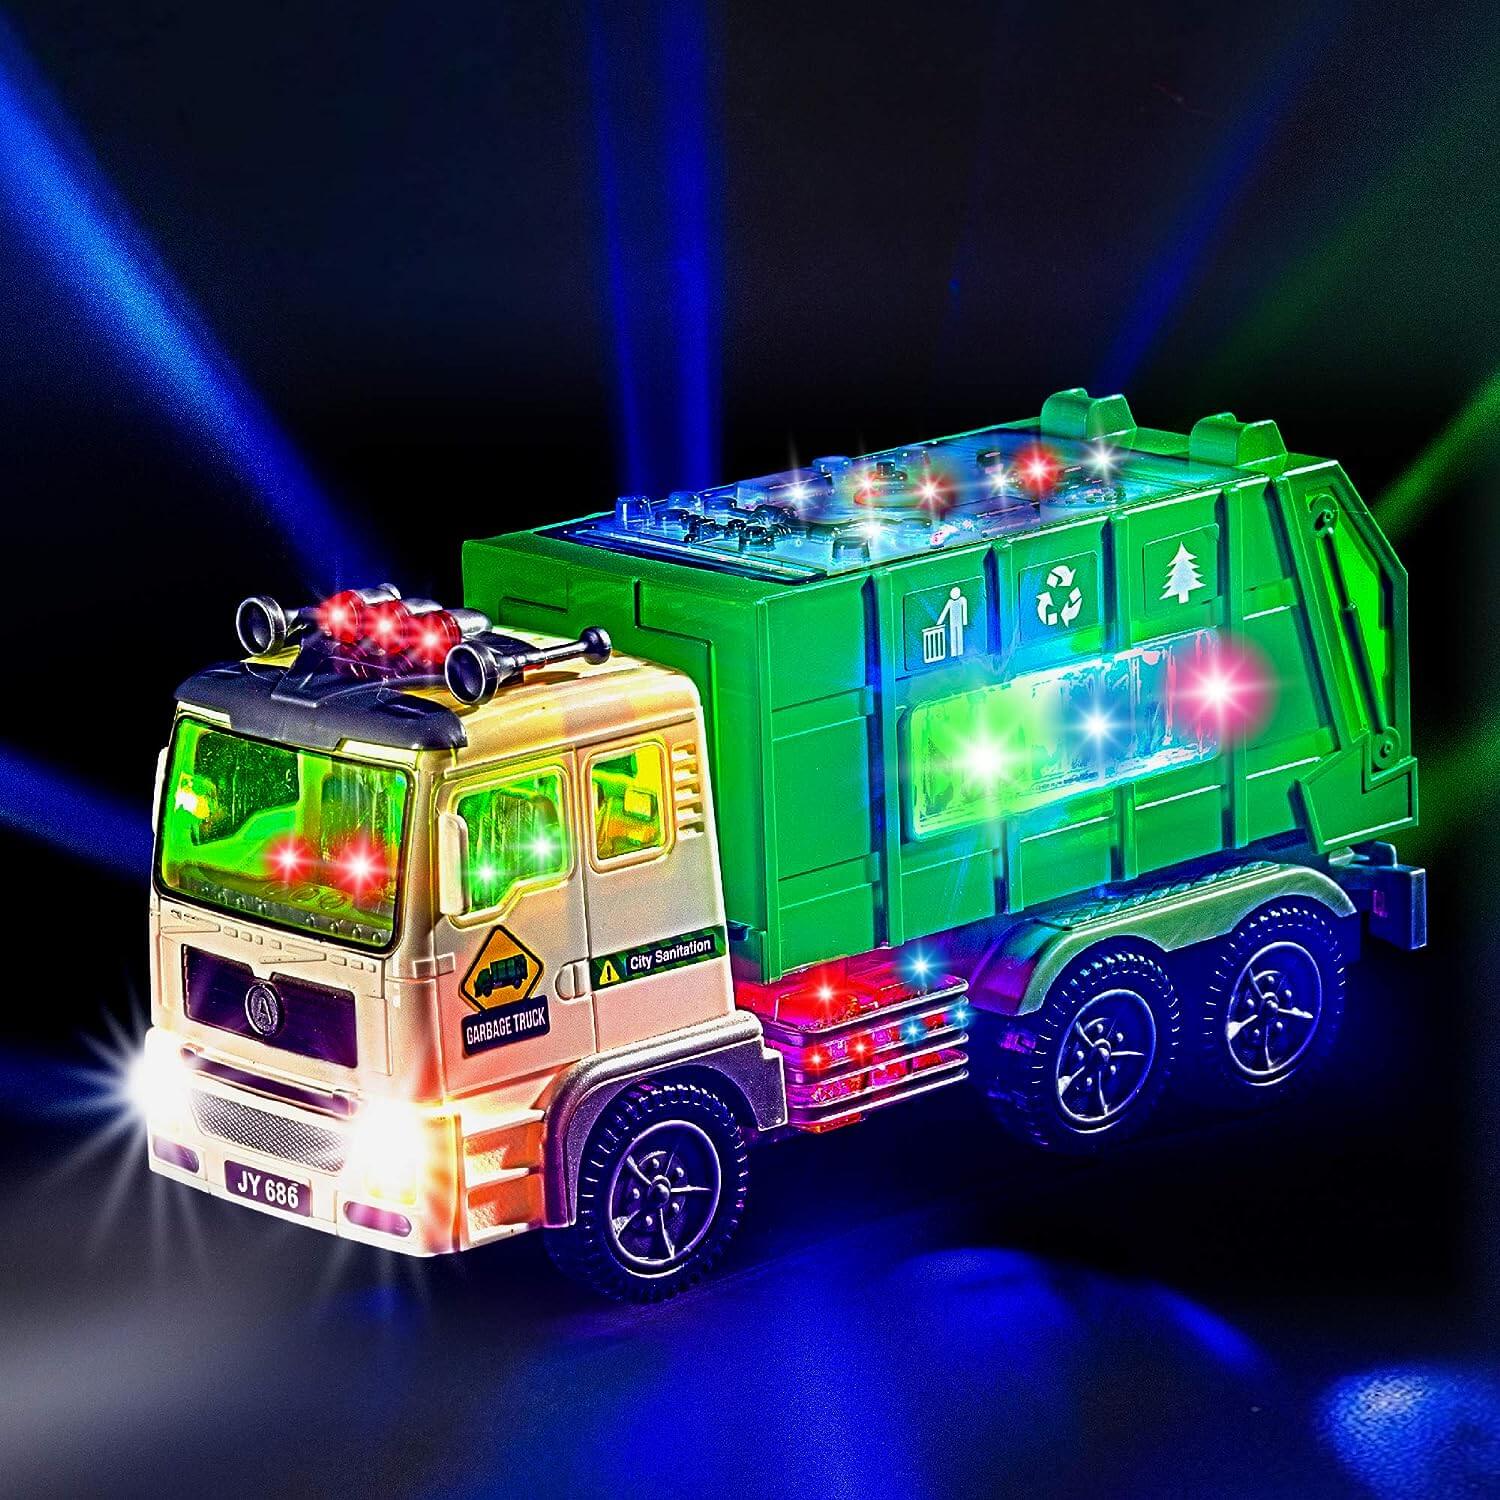 15.96 Toy Garbage Truck for Kids with 4D Lights and Sounds - Battery Operated Automatic Bump & Go $15.96